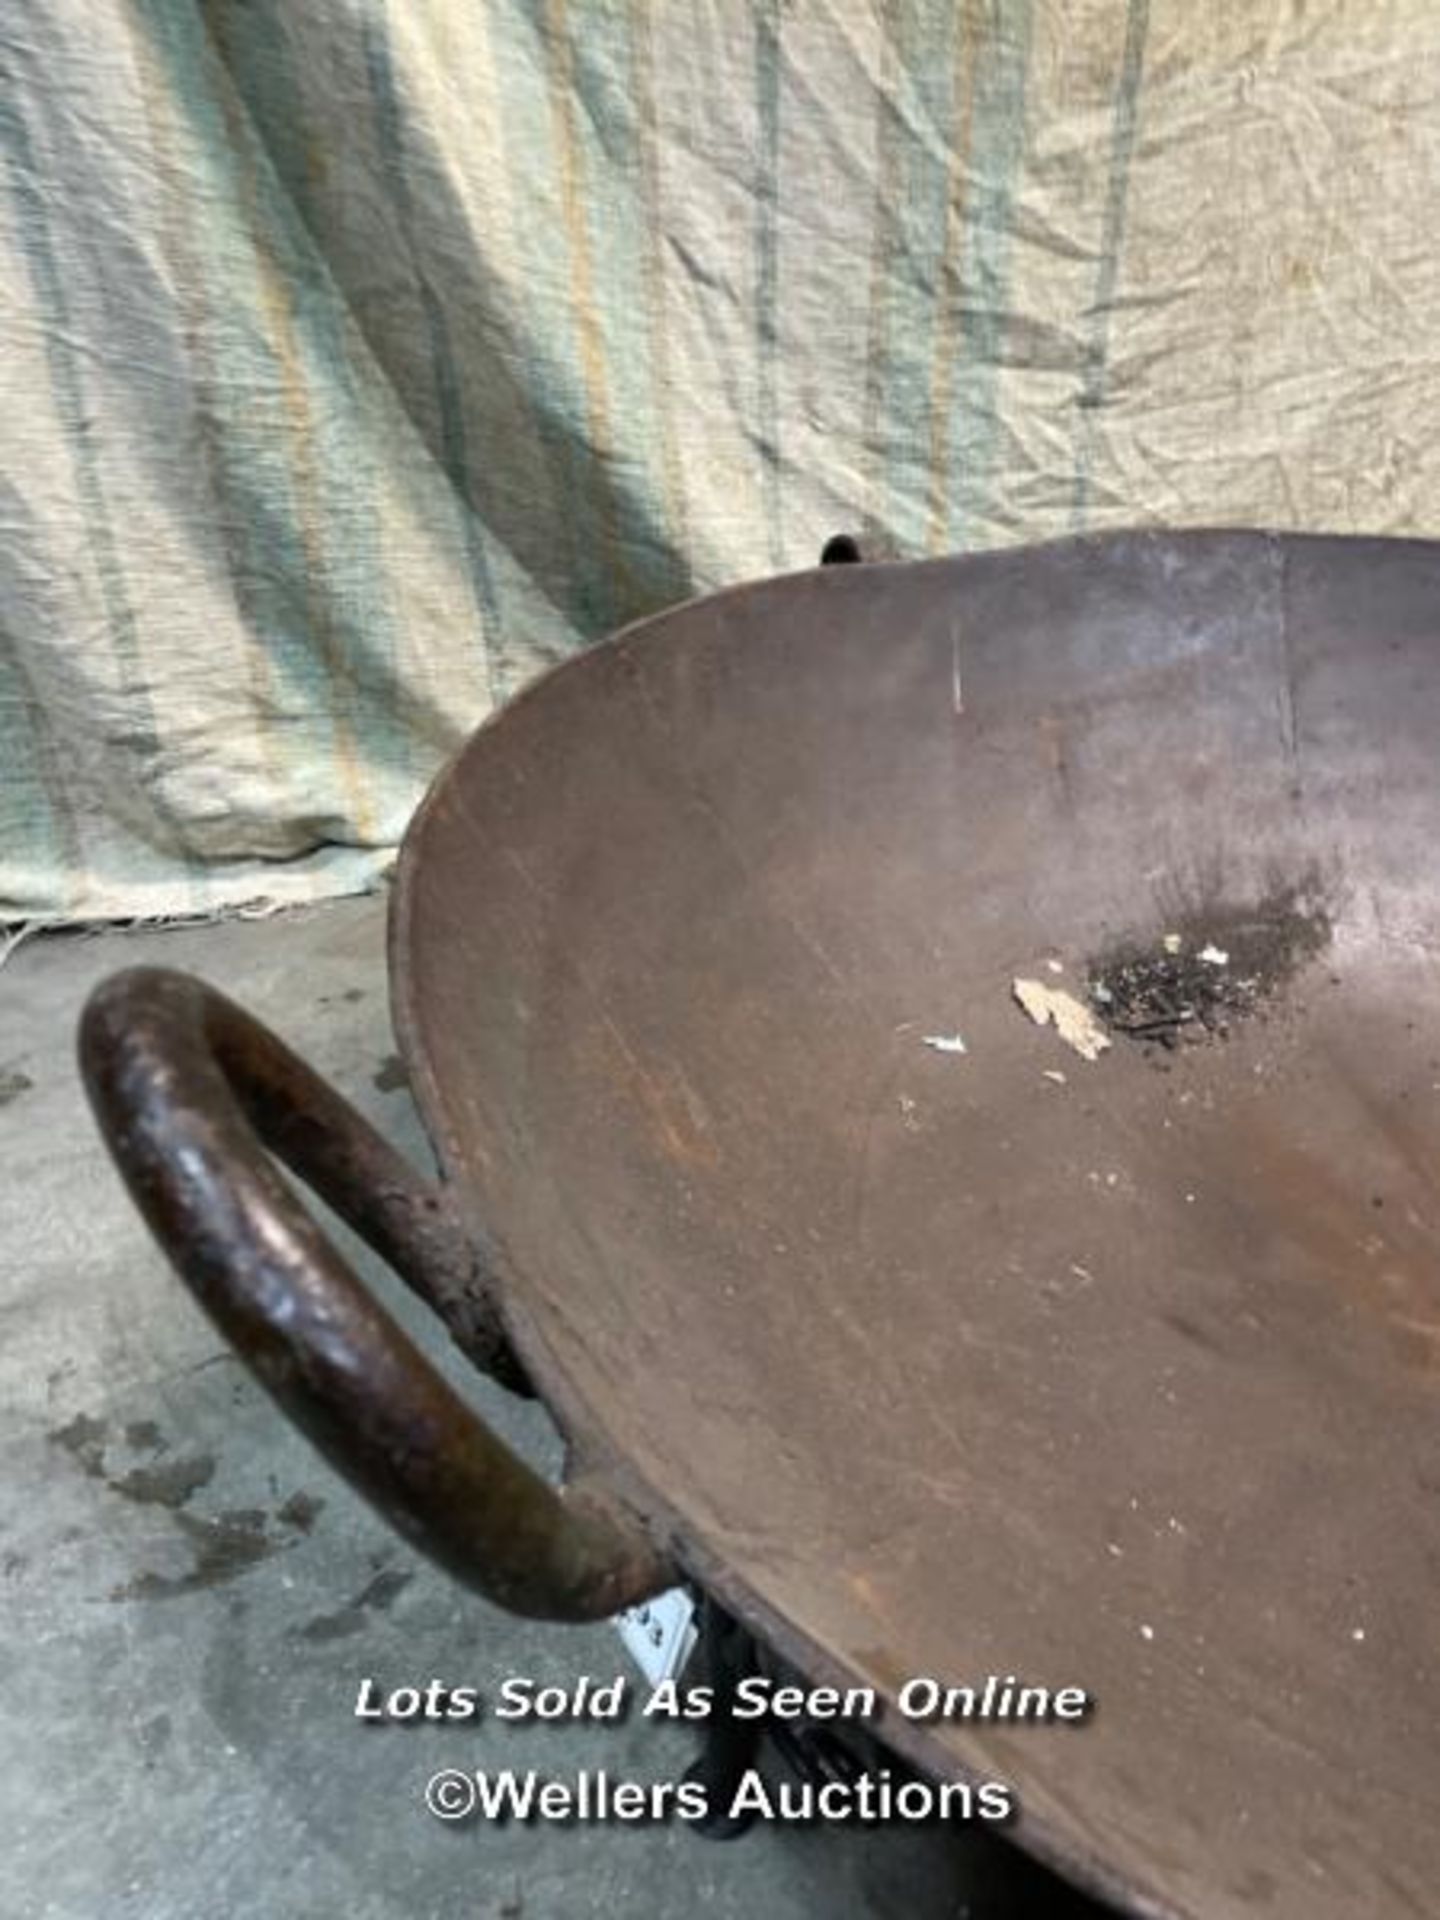 *HUGE KADAI WITH STAND - 100CM DIA X 30CM H / ITEM LOCATION: GUILDFORD, GU14SJ (WELLERS AUCTIONS), - Image 2 of 4